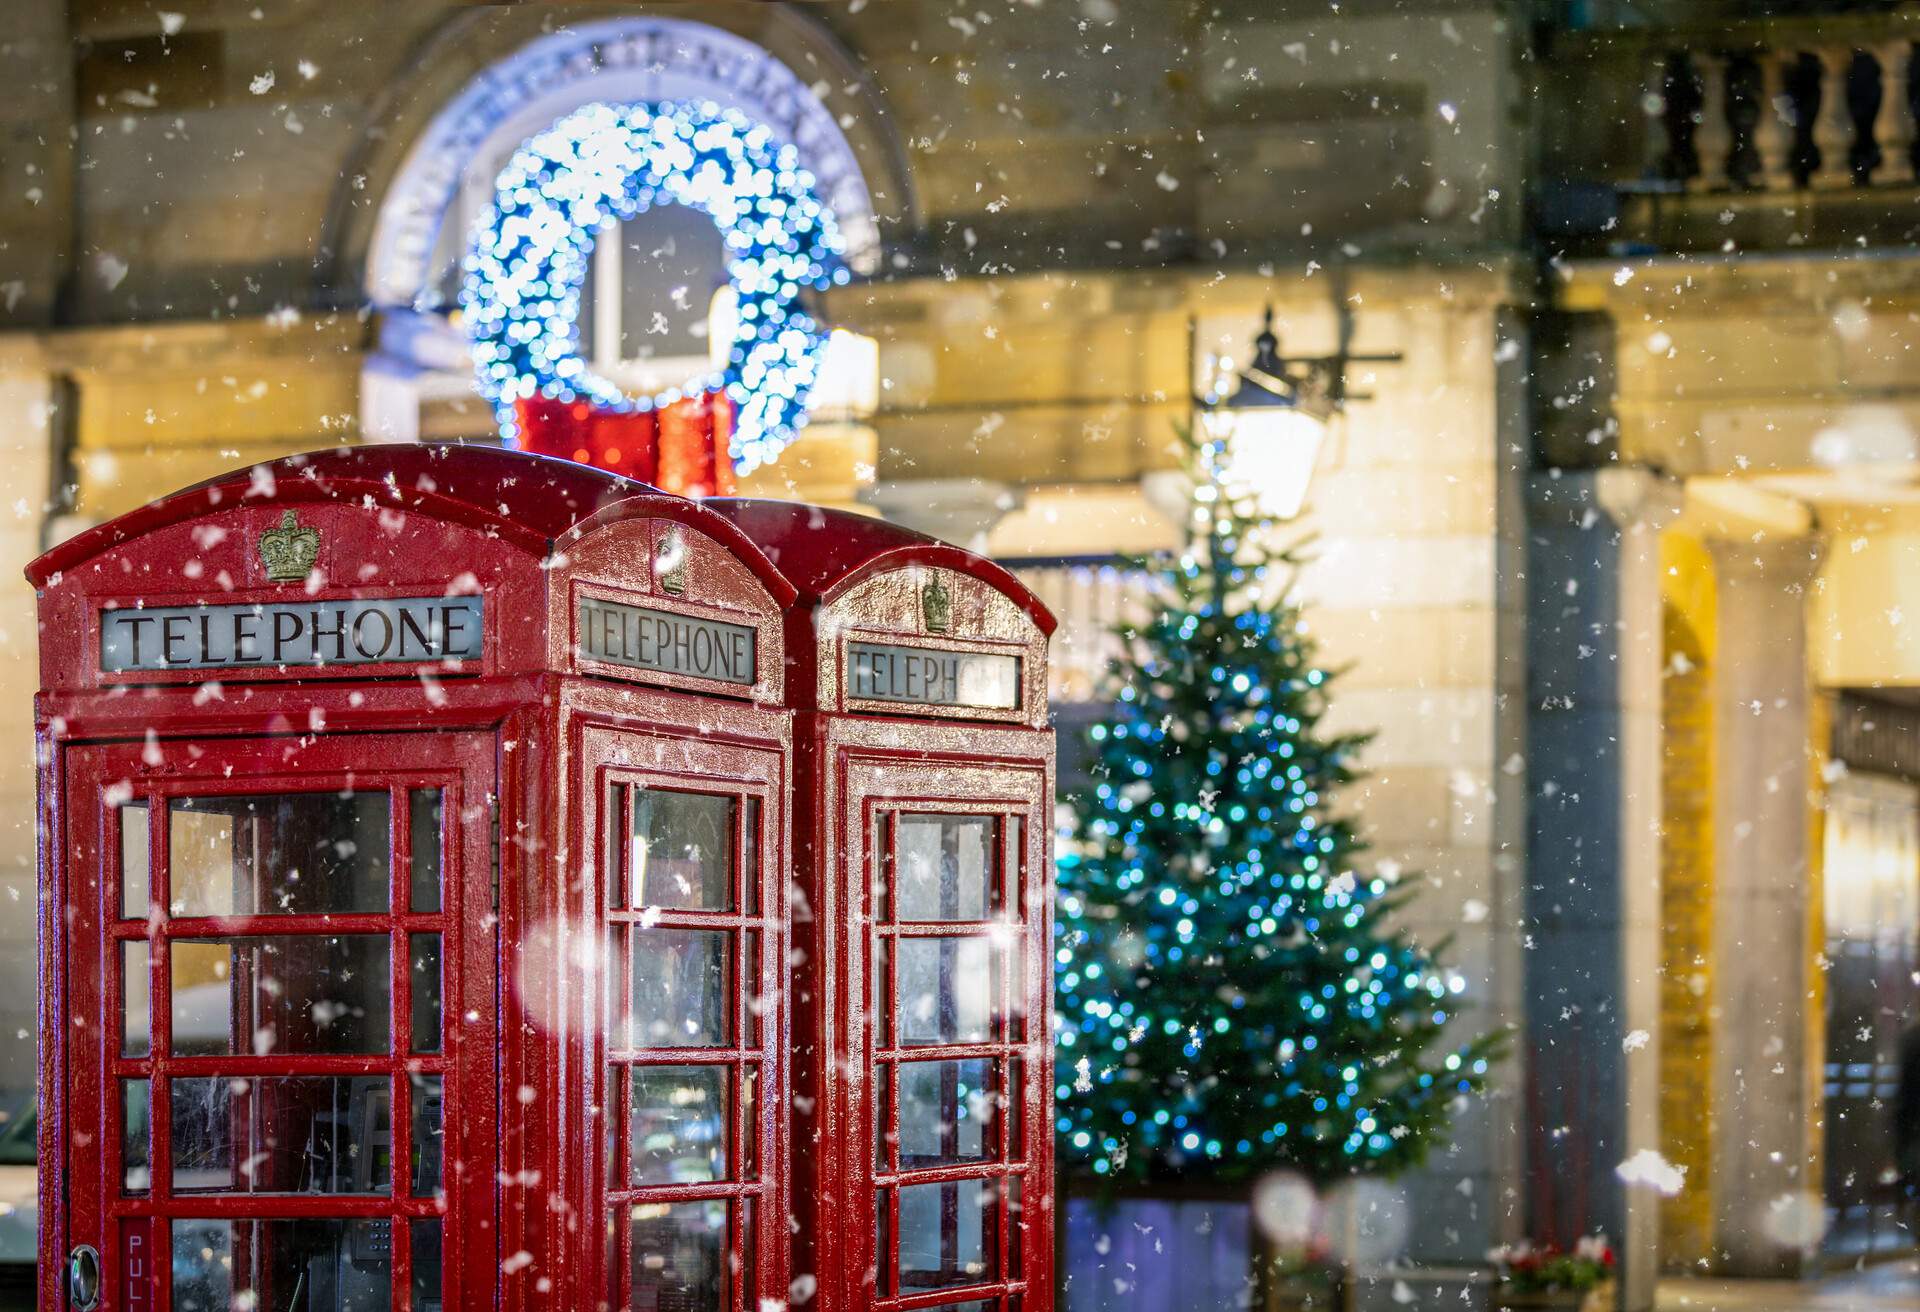 Two iconic red London telephone booths and an illuminated Christmas tree in the back, on a snowy winter night.